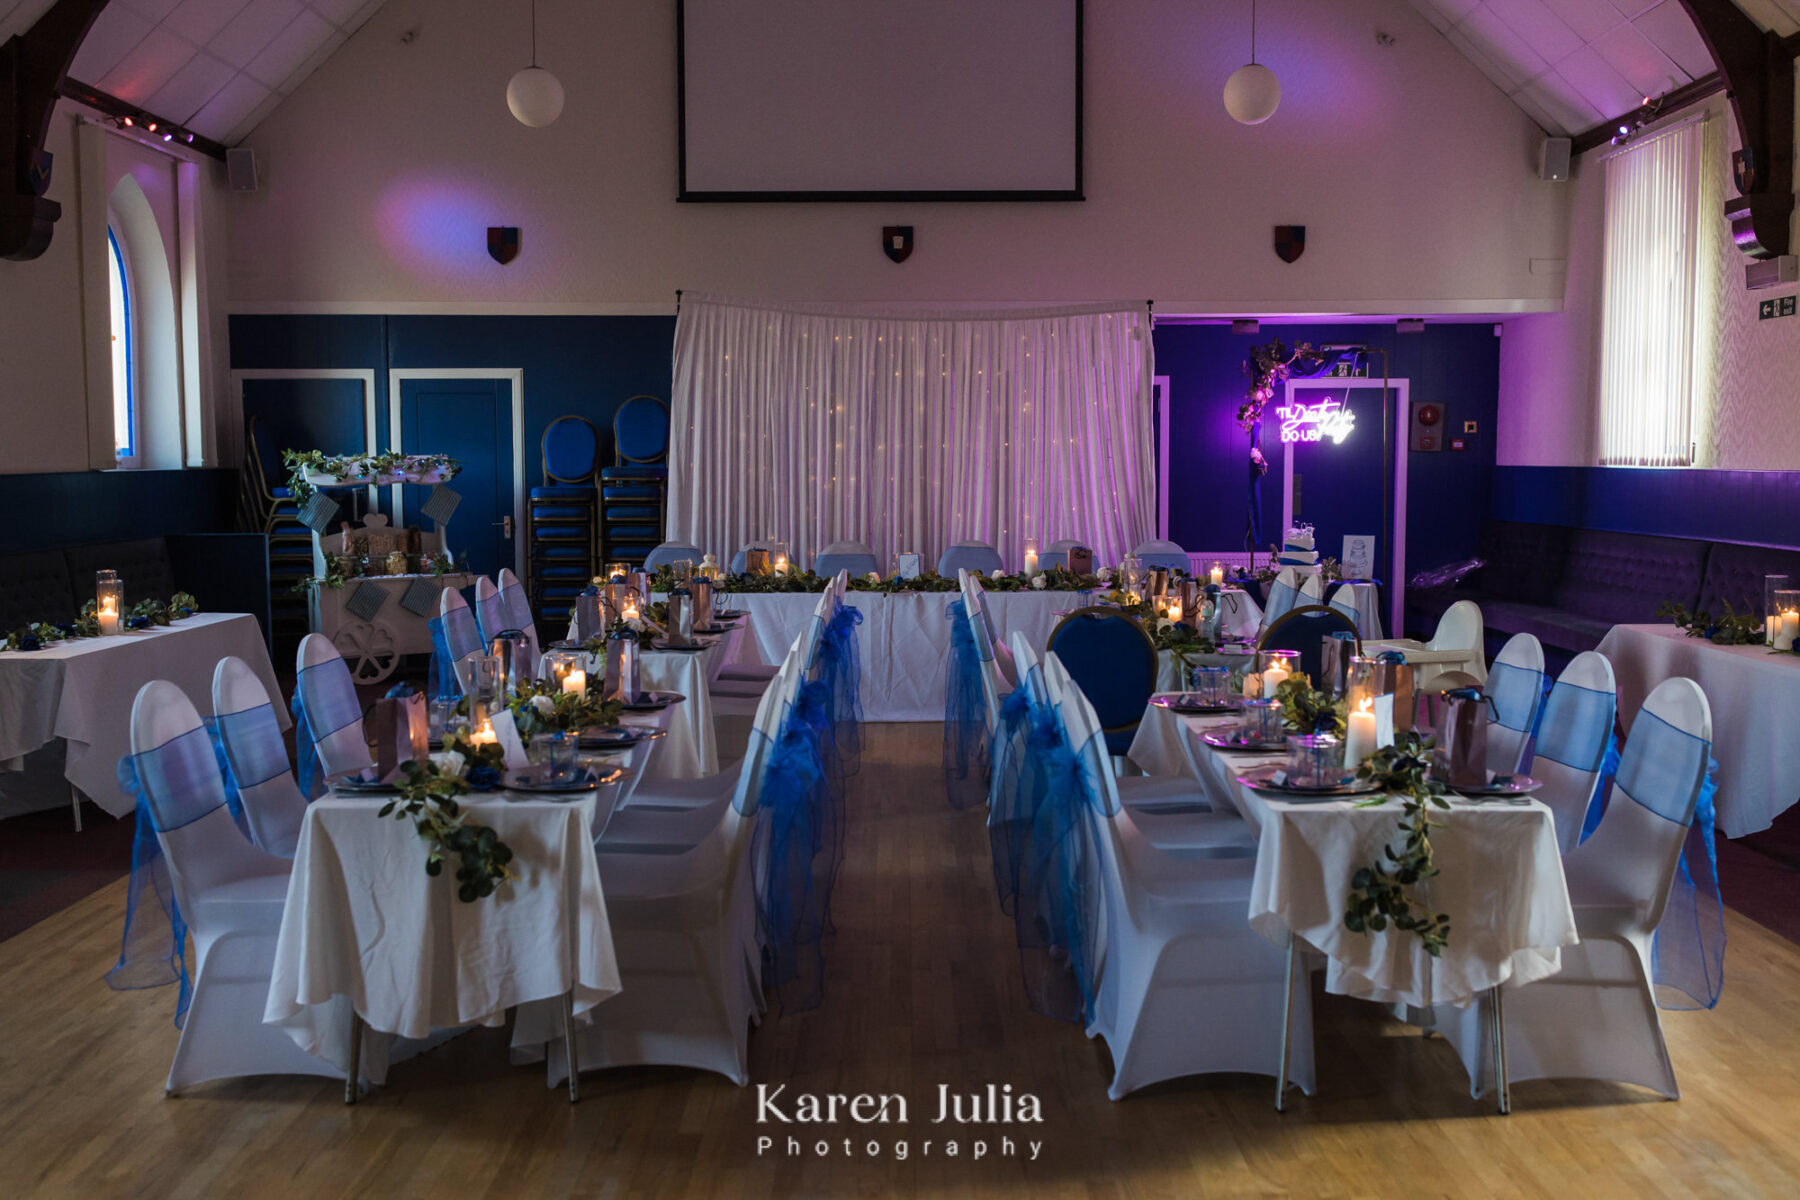 Rutherglen Masonic Hall styled for a wedding reception with florals and blue accents